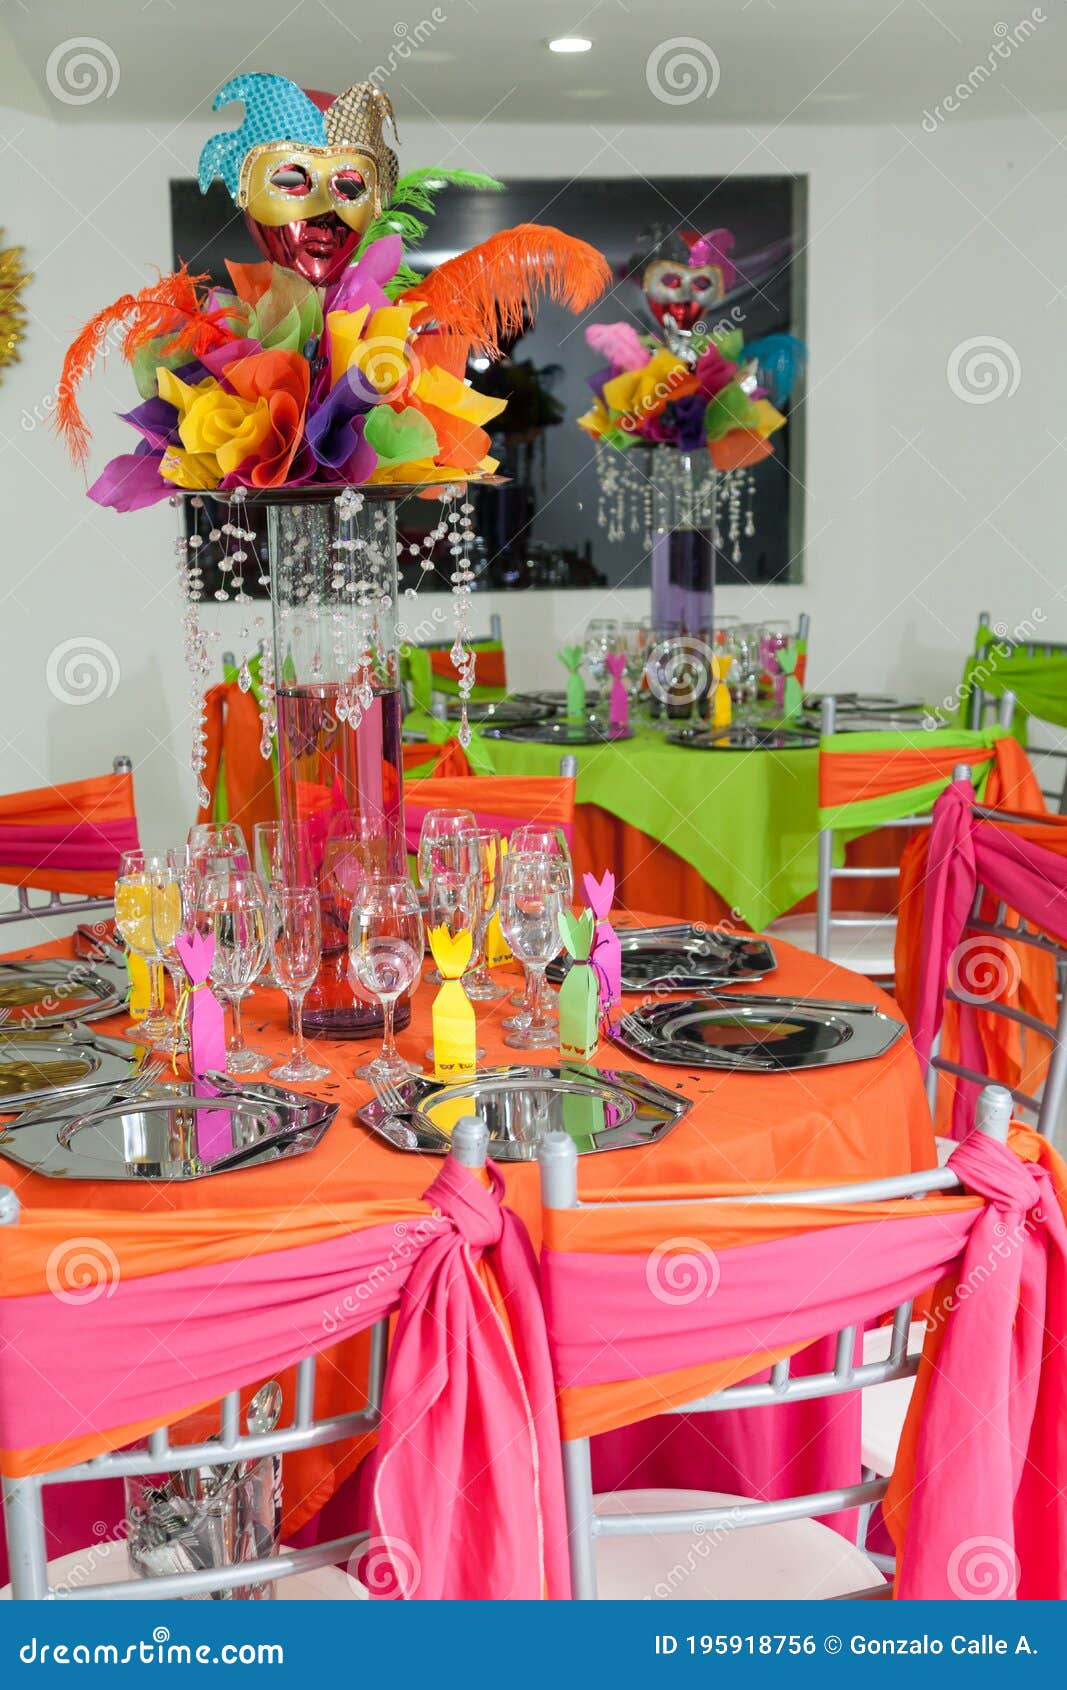 15 Thrilling Carnival Theme Party Decoration Ideas This Year | Coachella  theme party, Caribbean theme party, Carnival themes